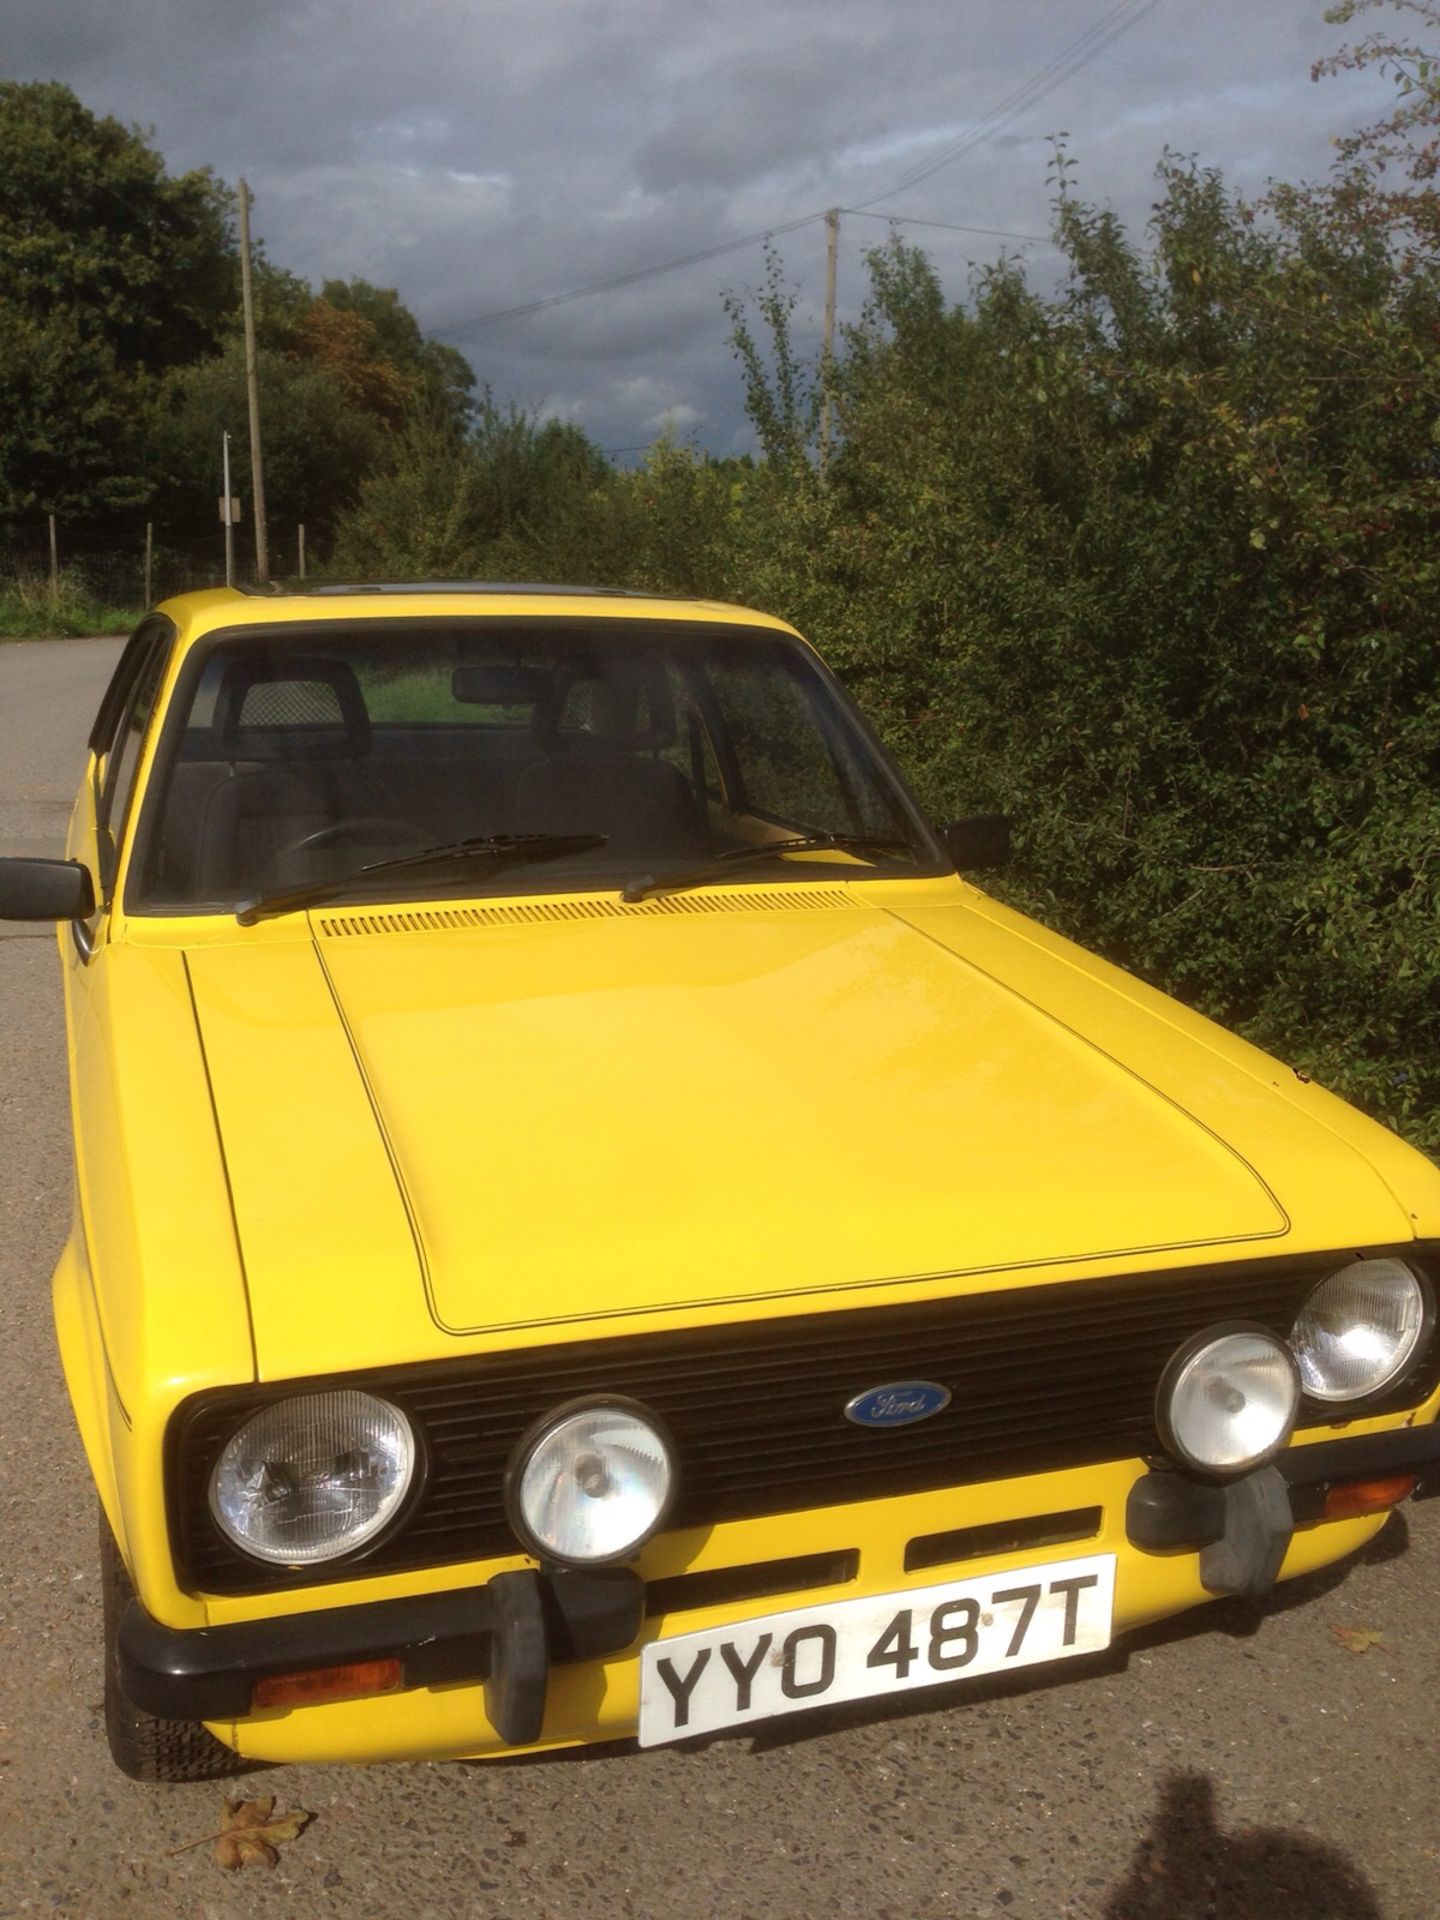 1979/T Ford Escort mk2 1600 Sport - in Signal yellow -  UK car  (545 miles) since rebuild - Image 10 of 54